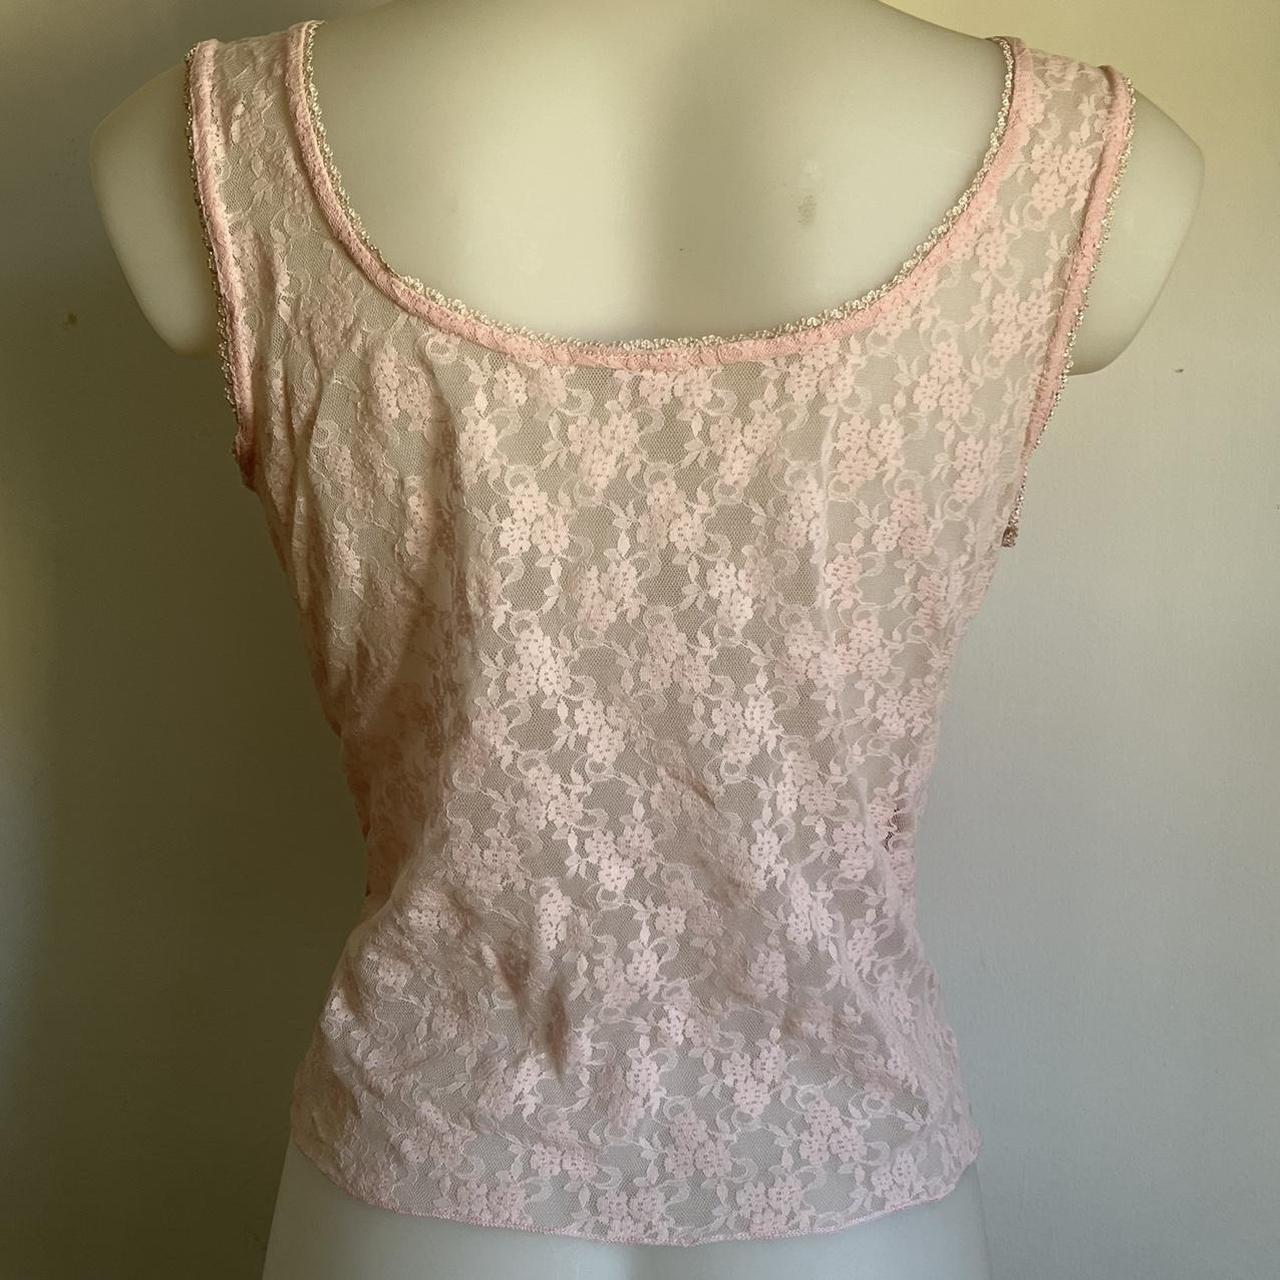 Milkmaid pink lace top with ribbon corset 🎀 cutest... - Depop